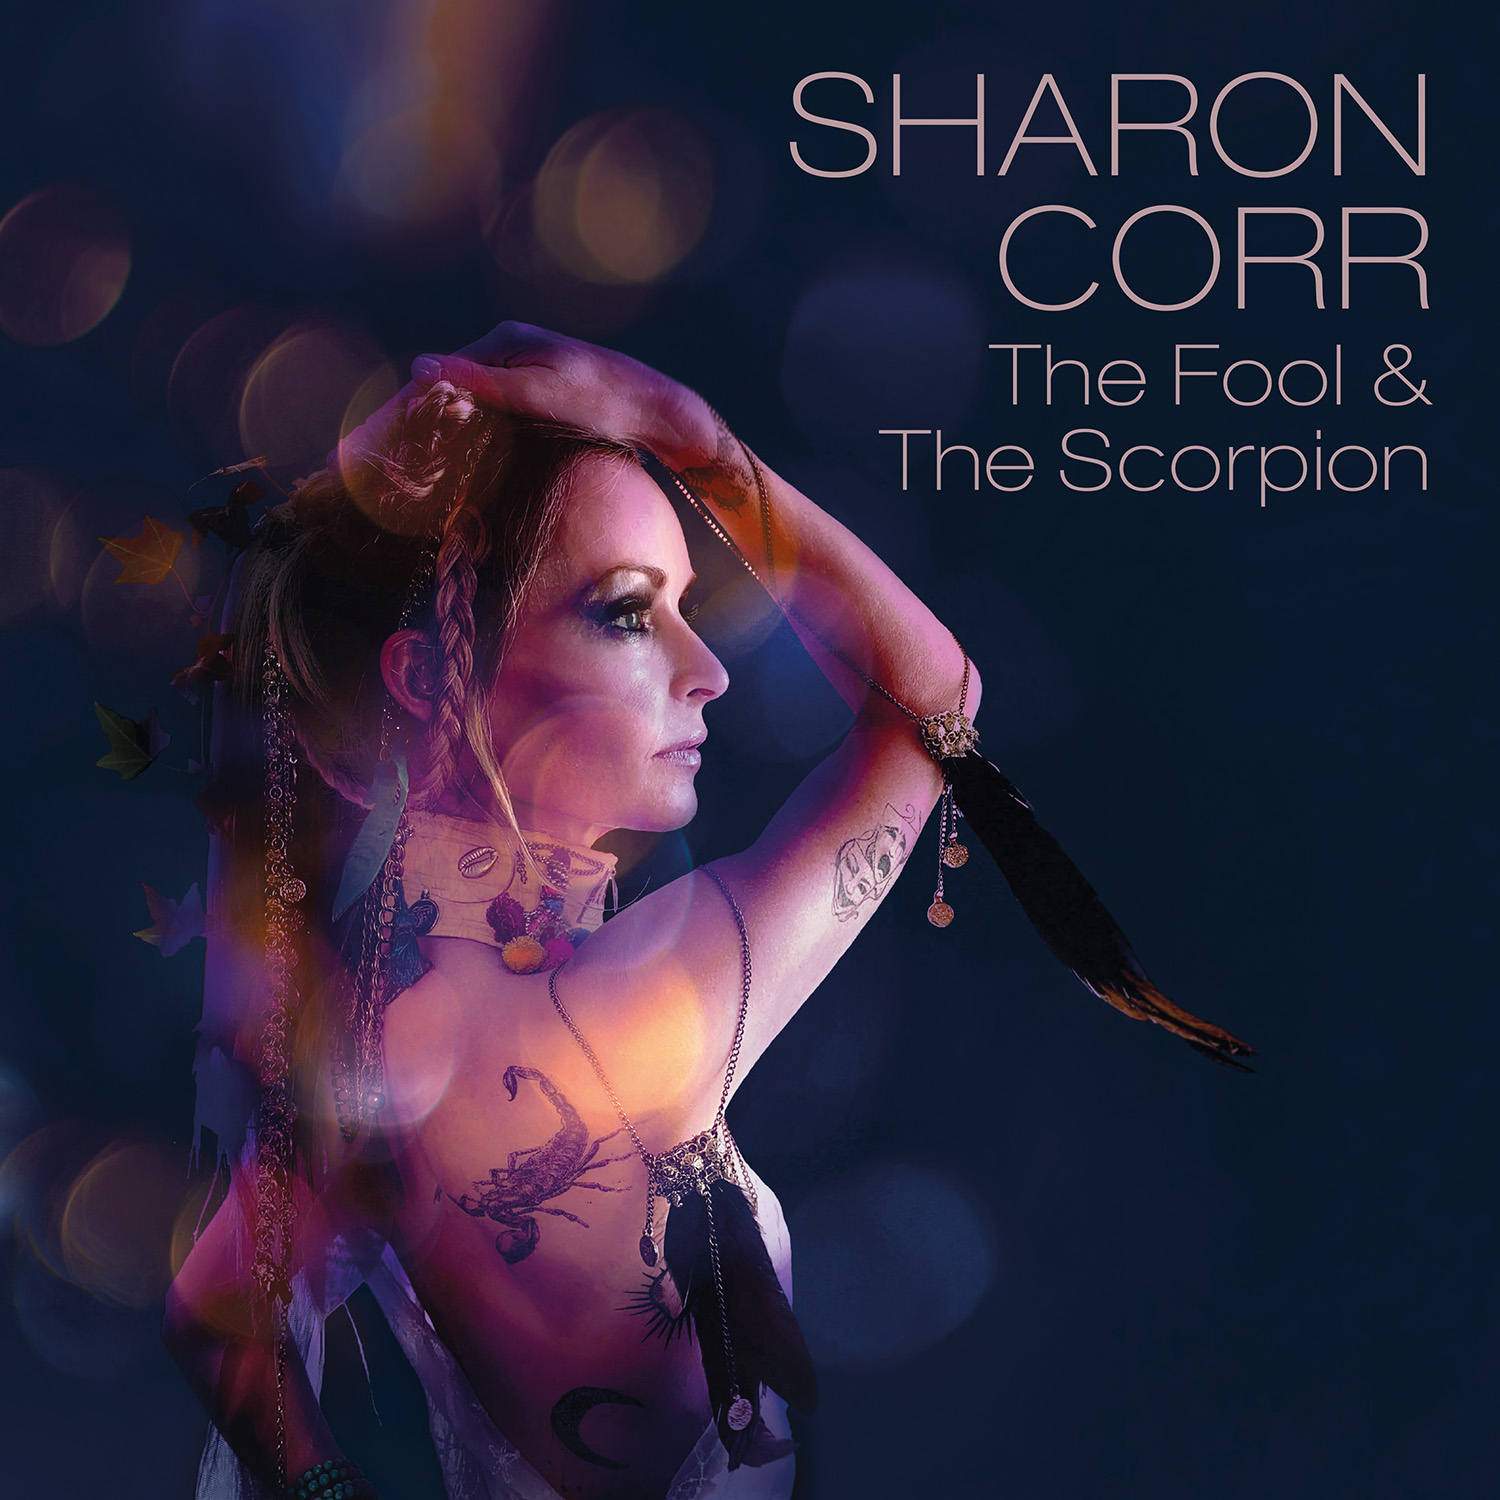 SHARON CORR RETURNS WITH NEW SINGLE ‘FREEFALL’ TAKEN FROM HER UPCOMING ALBUM ‘THE FOOL & THE SCORPION